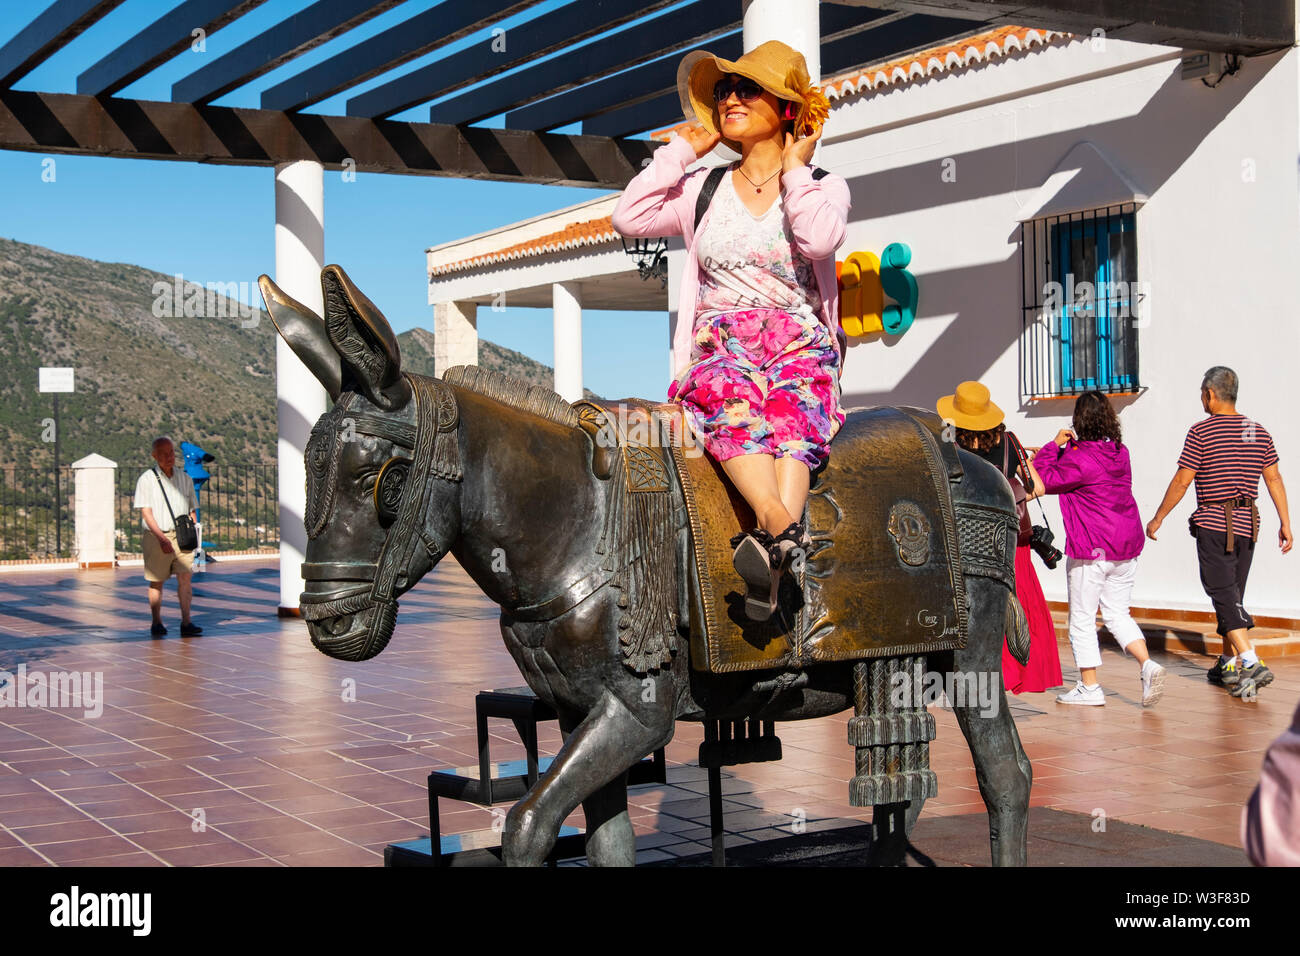 Oriental tourists riding the typical donkey taxi, white village of Mijas. Malaga province Costa del Sol. Andalusia, Southern Spain Europe Stock Photo